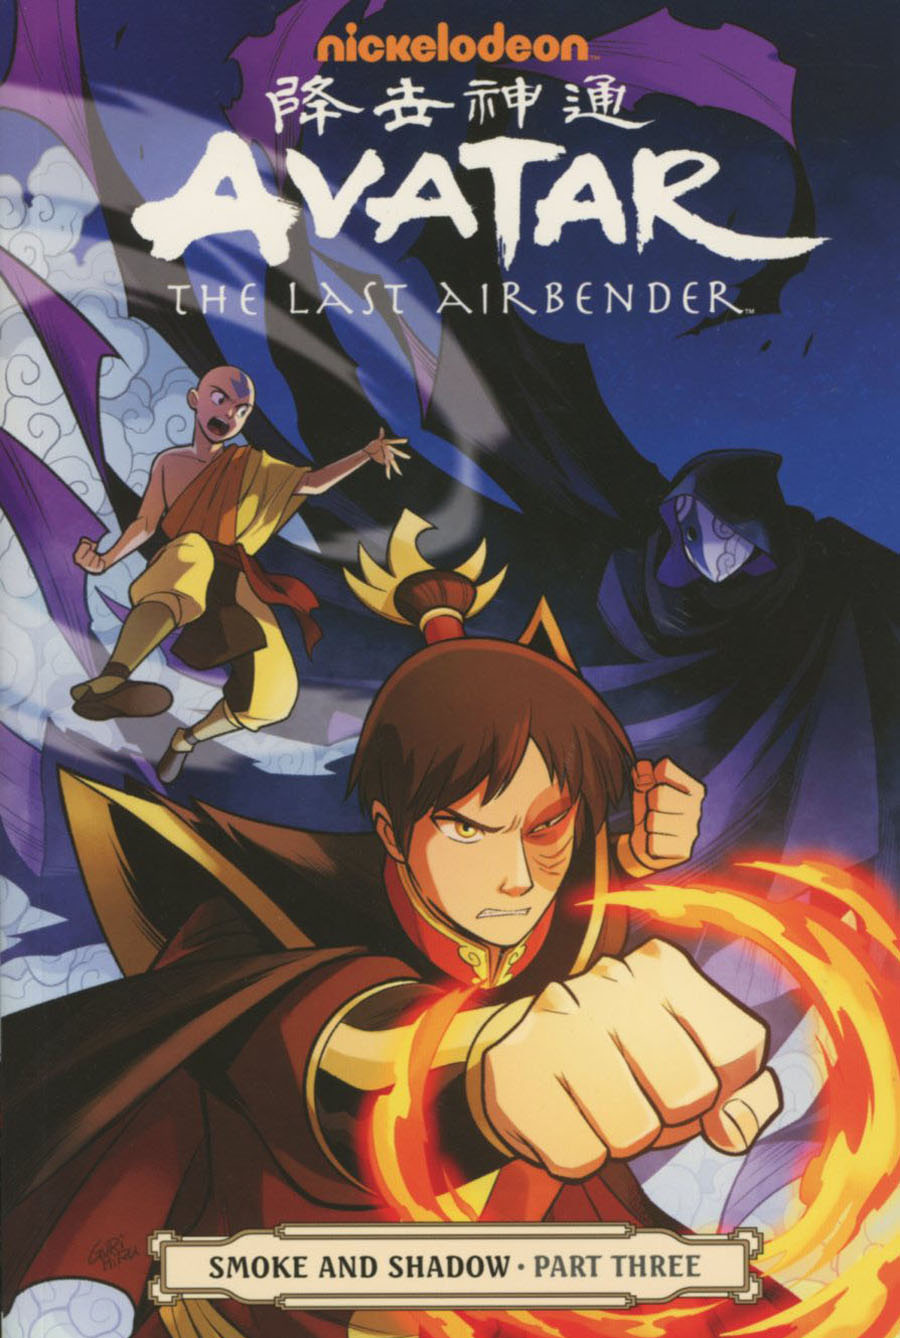 Avatar The Last Airbender Vol 12 Smoke And Shadow Part 3 TP